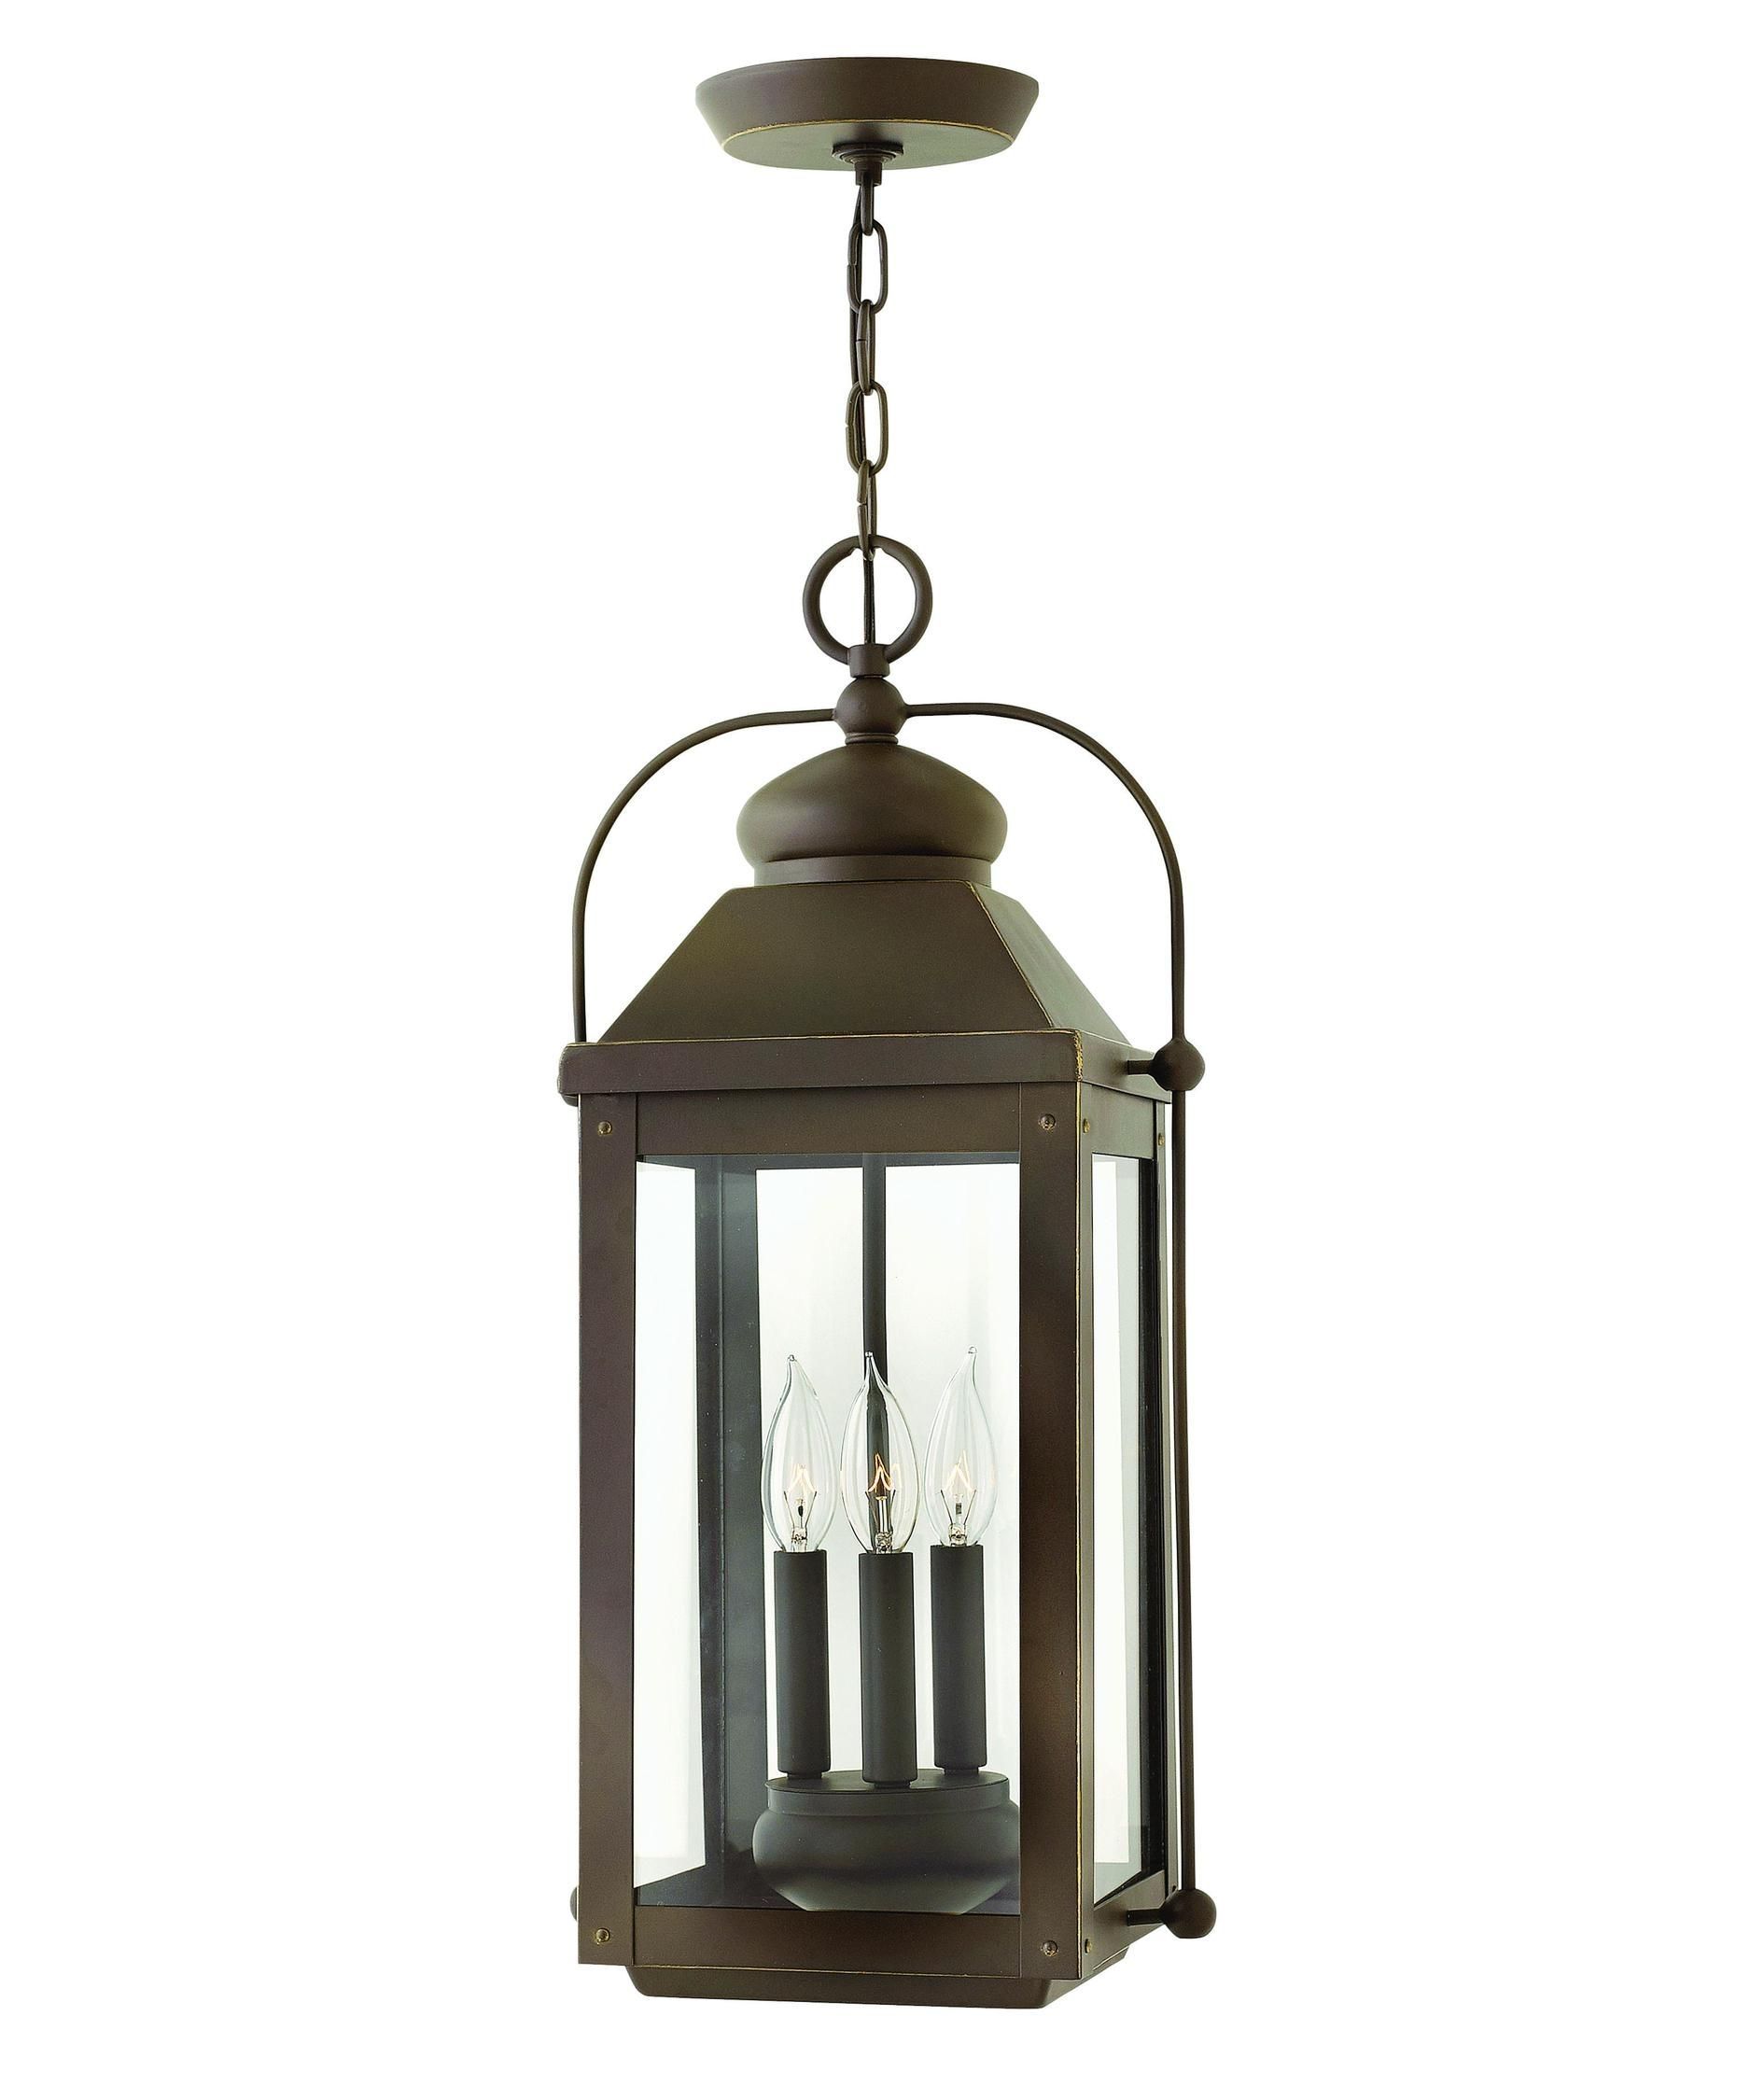 Hinkley Lighting Anchorage 11 Inch Wide 3 Light Outdoor Hanging Inside Hanging Porch Hinkley Lighting (View 6 of 15)